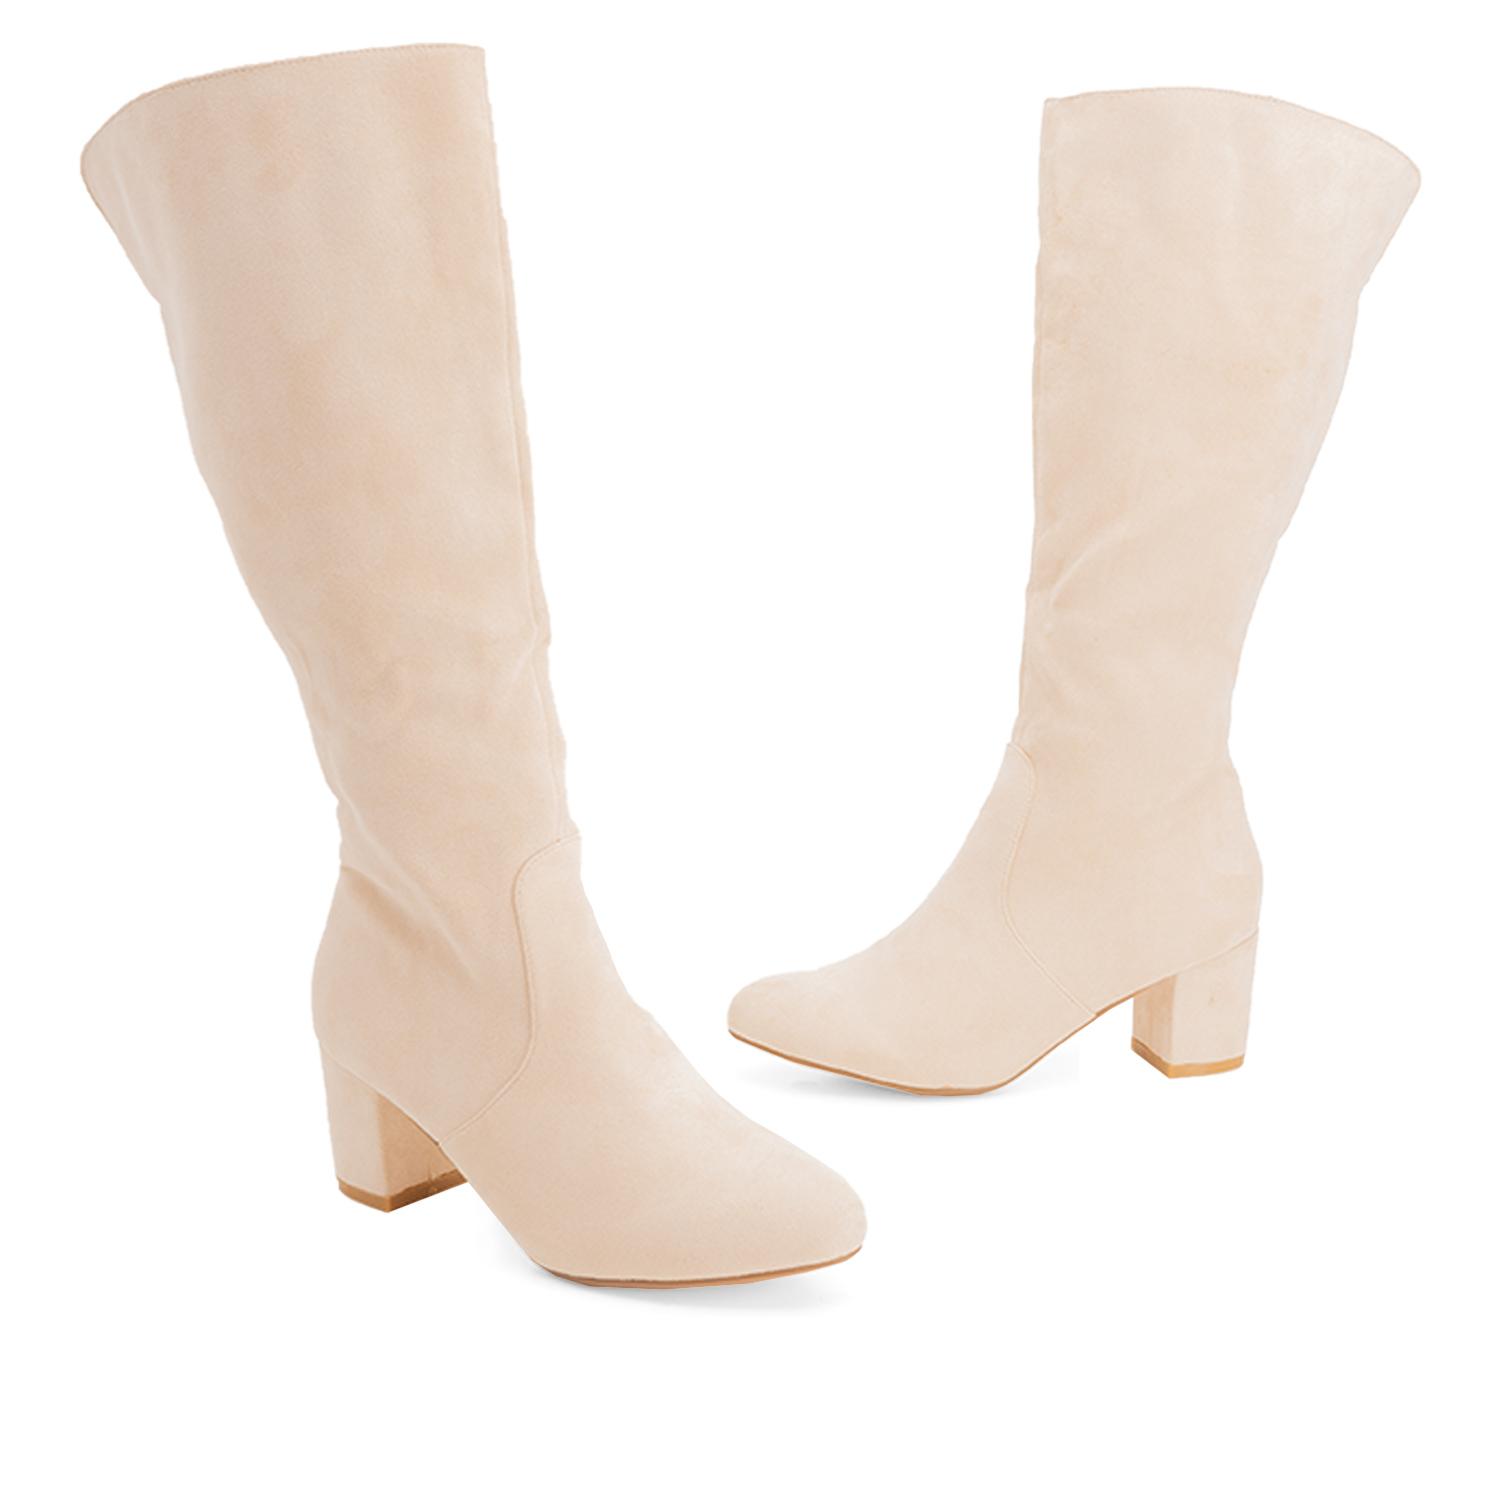 Heeled mid-calf boots in off-white faux suede 